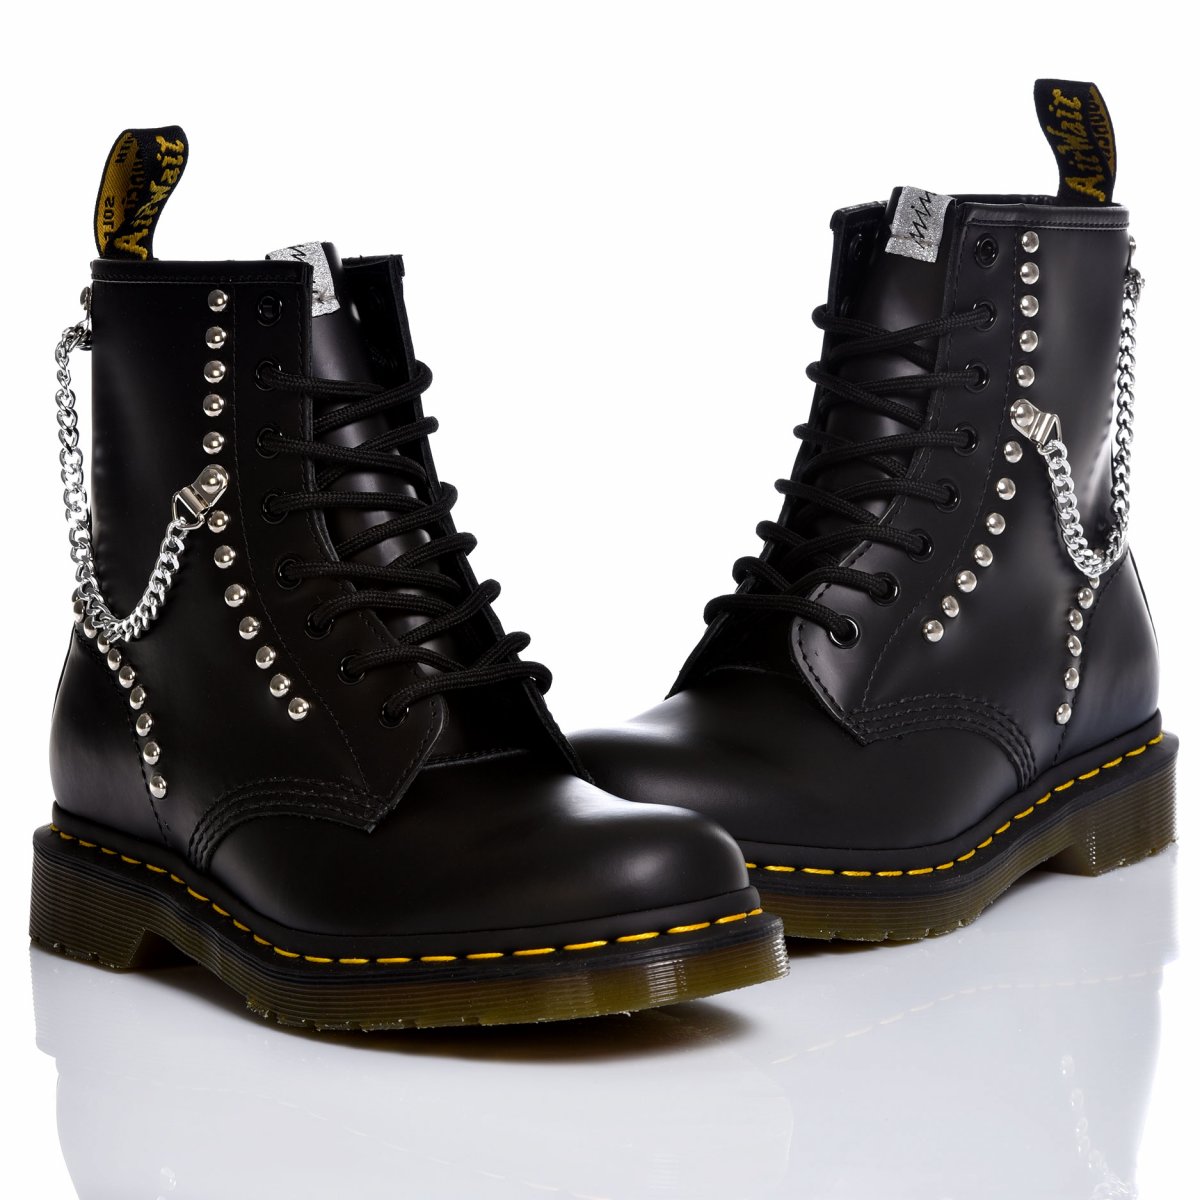 Dr. Martens Chain Studs Smooth Borchie